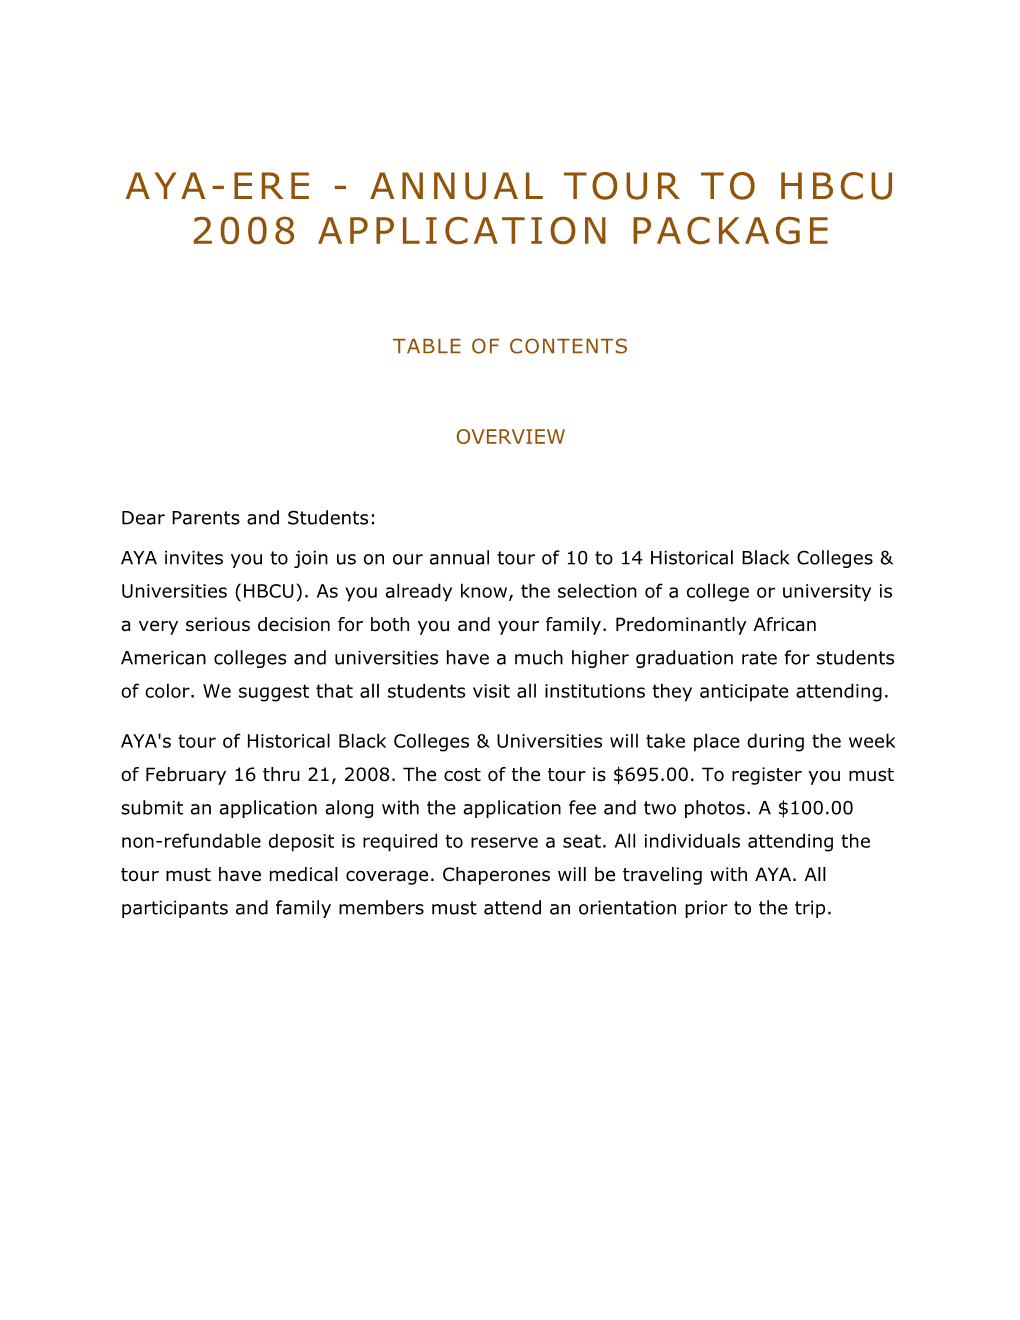 AYA-ERE - Annual Tour to HBCU 2008 APPLICATION PACKAGE